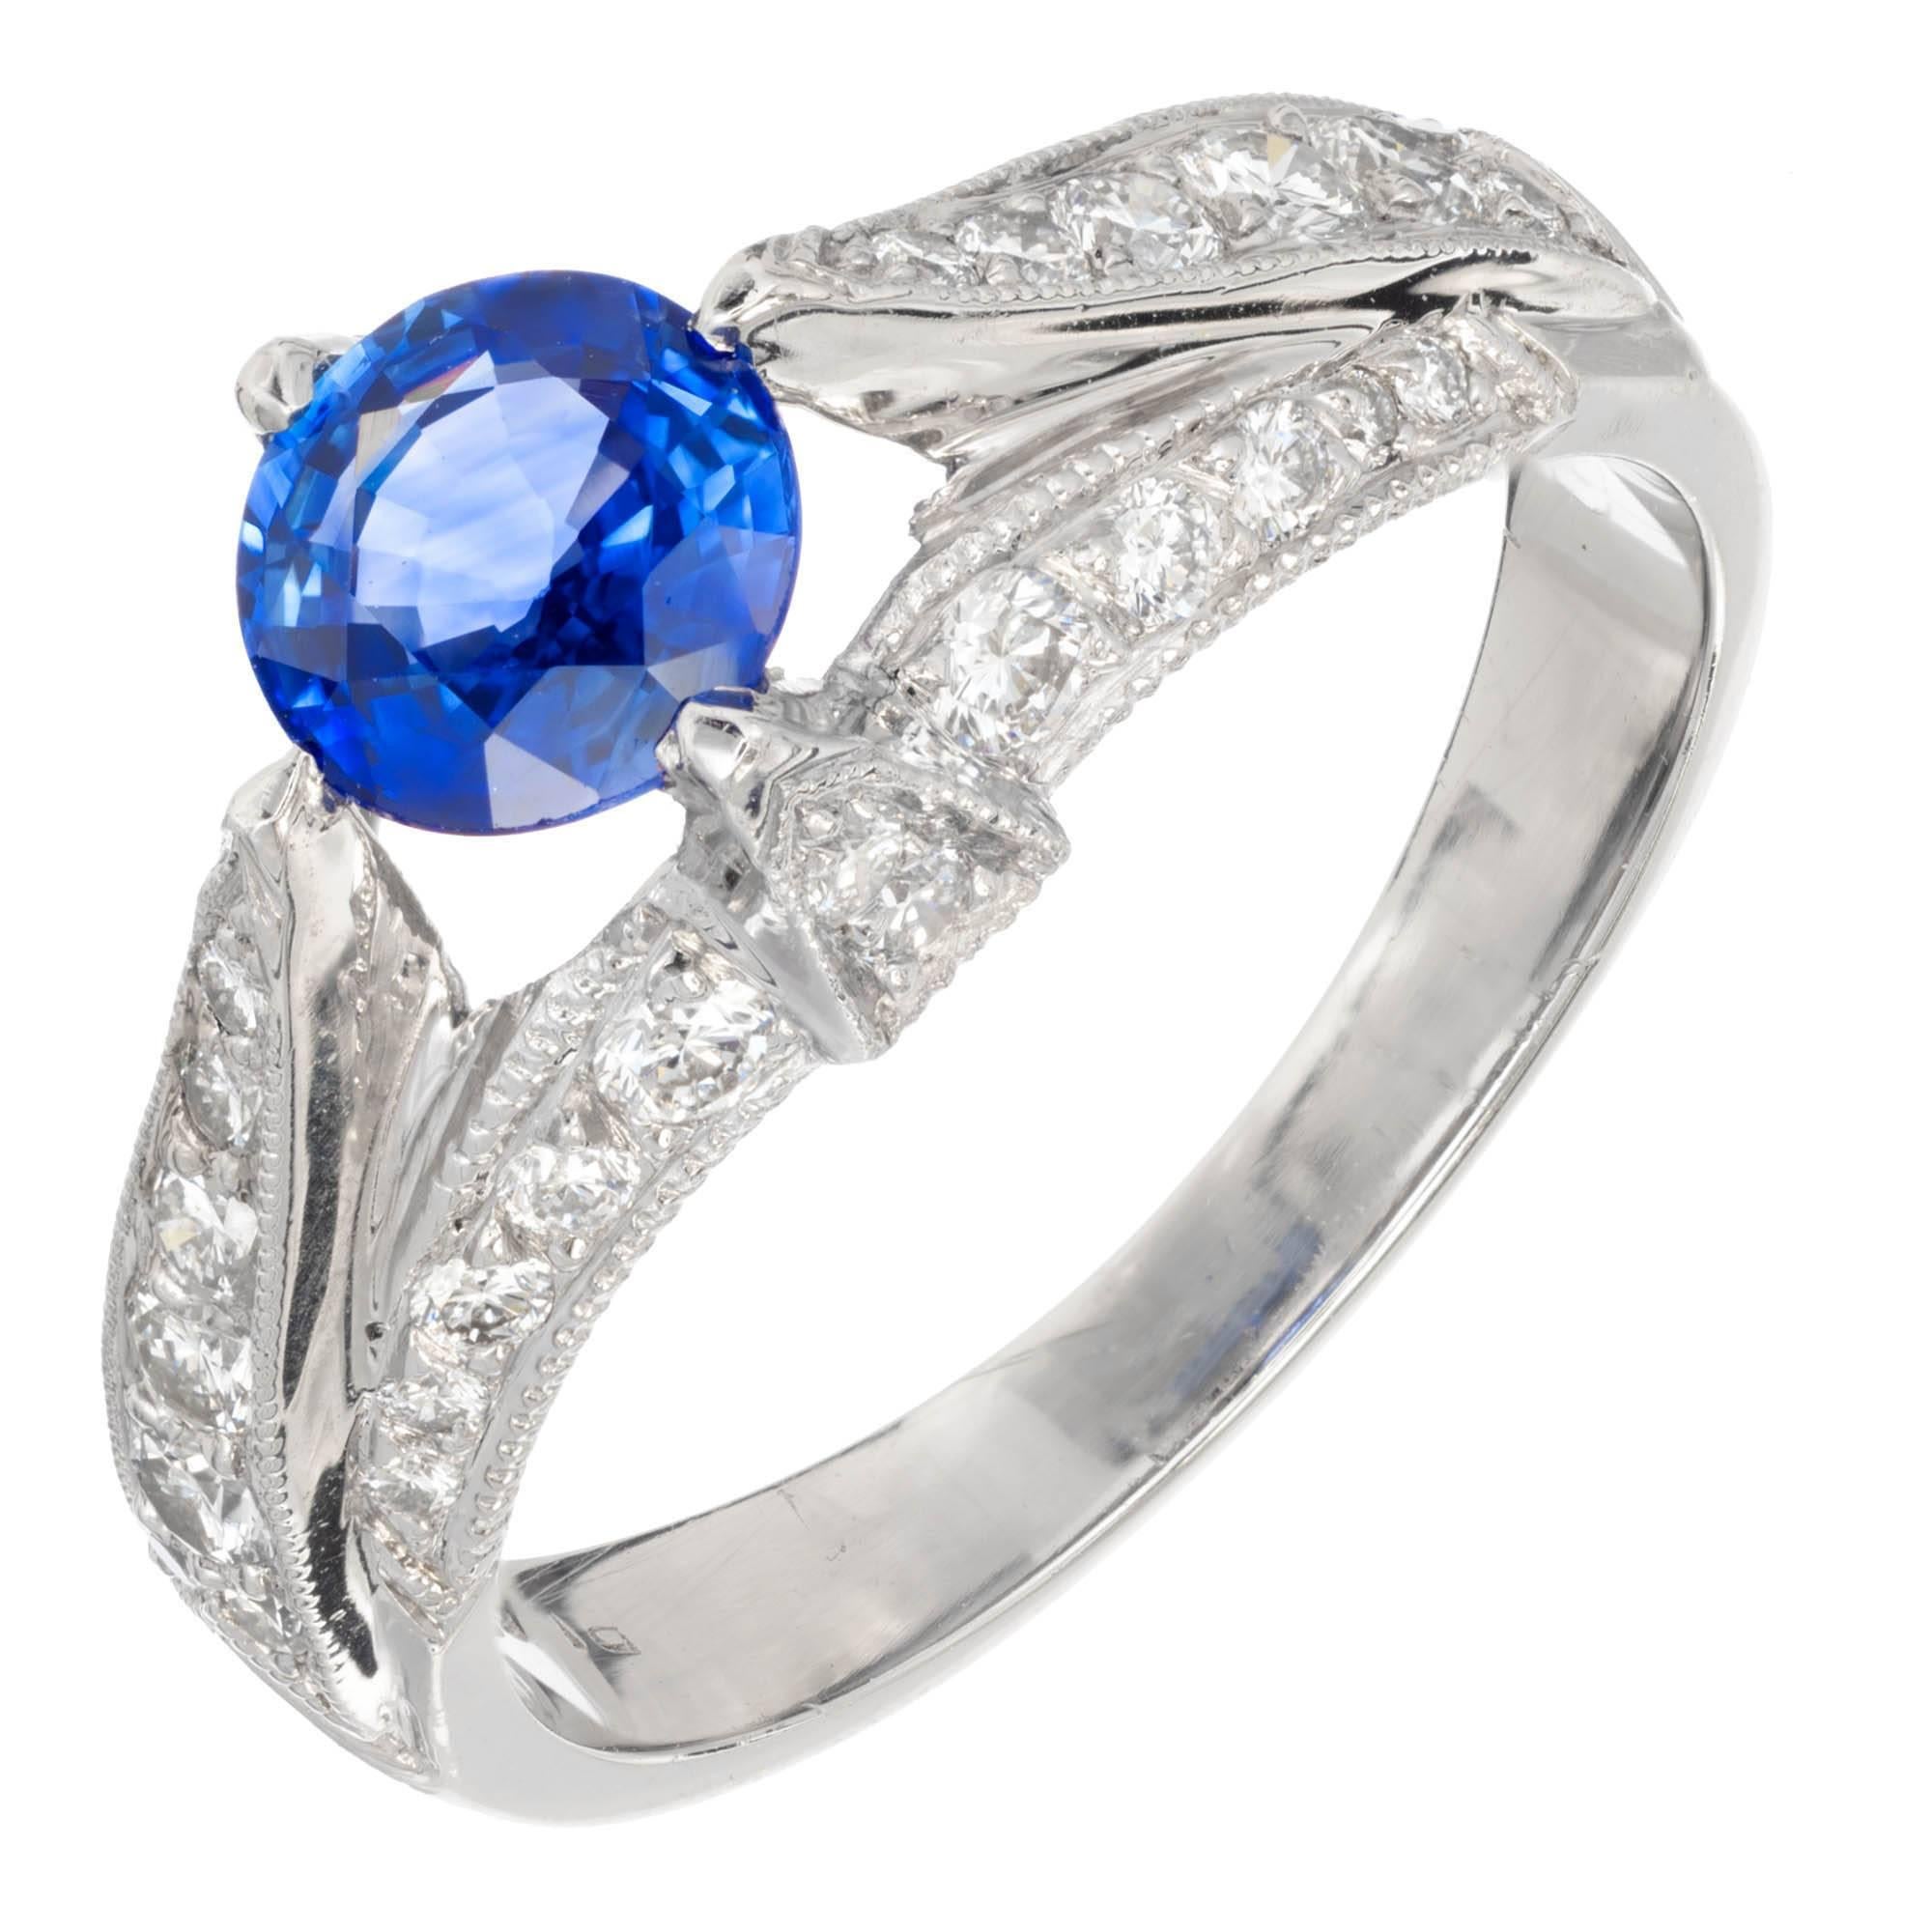 Tacori platinum sapphire and diamond Tacori engagement ring. The Center sapphire is accented on each size with round brilliant cut diamonds graduating from small to large with diamonds also set across shank of ring.

1 round blue sapphire